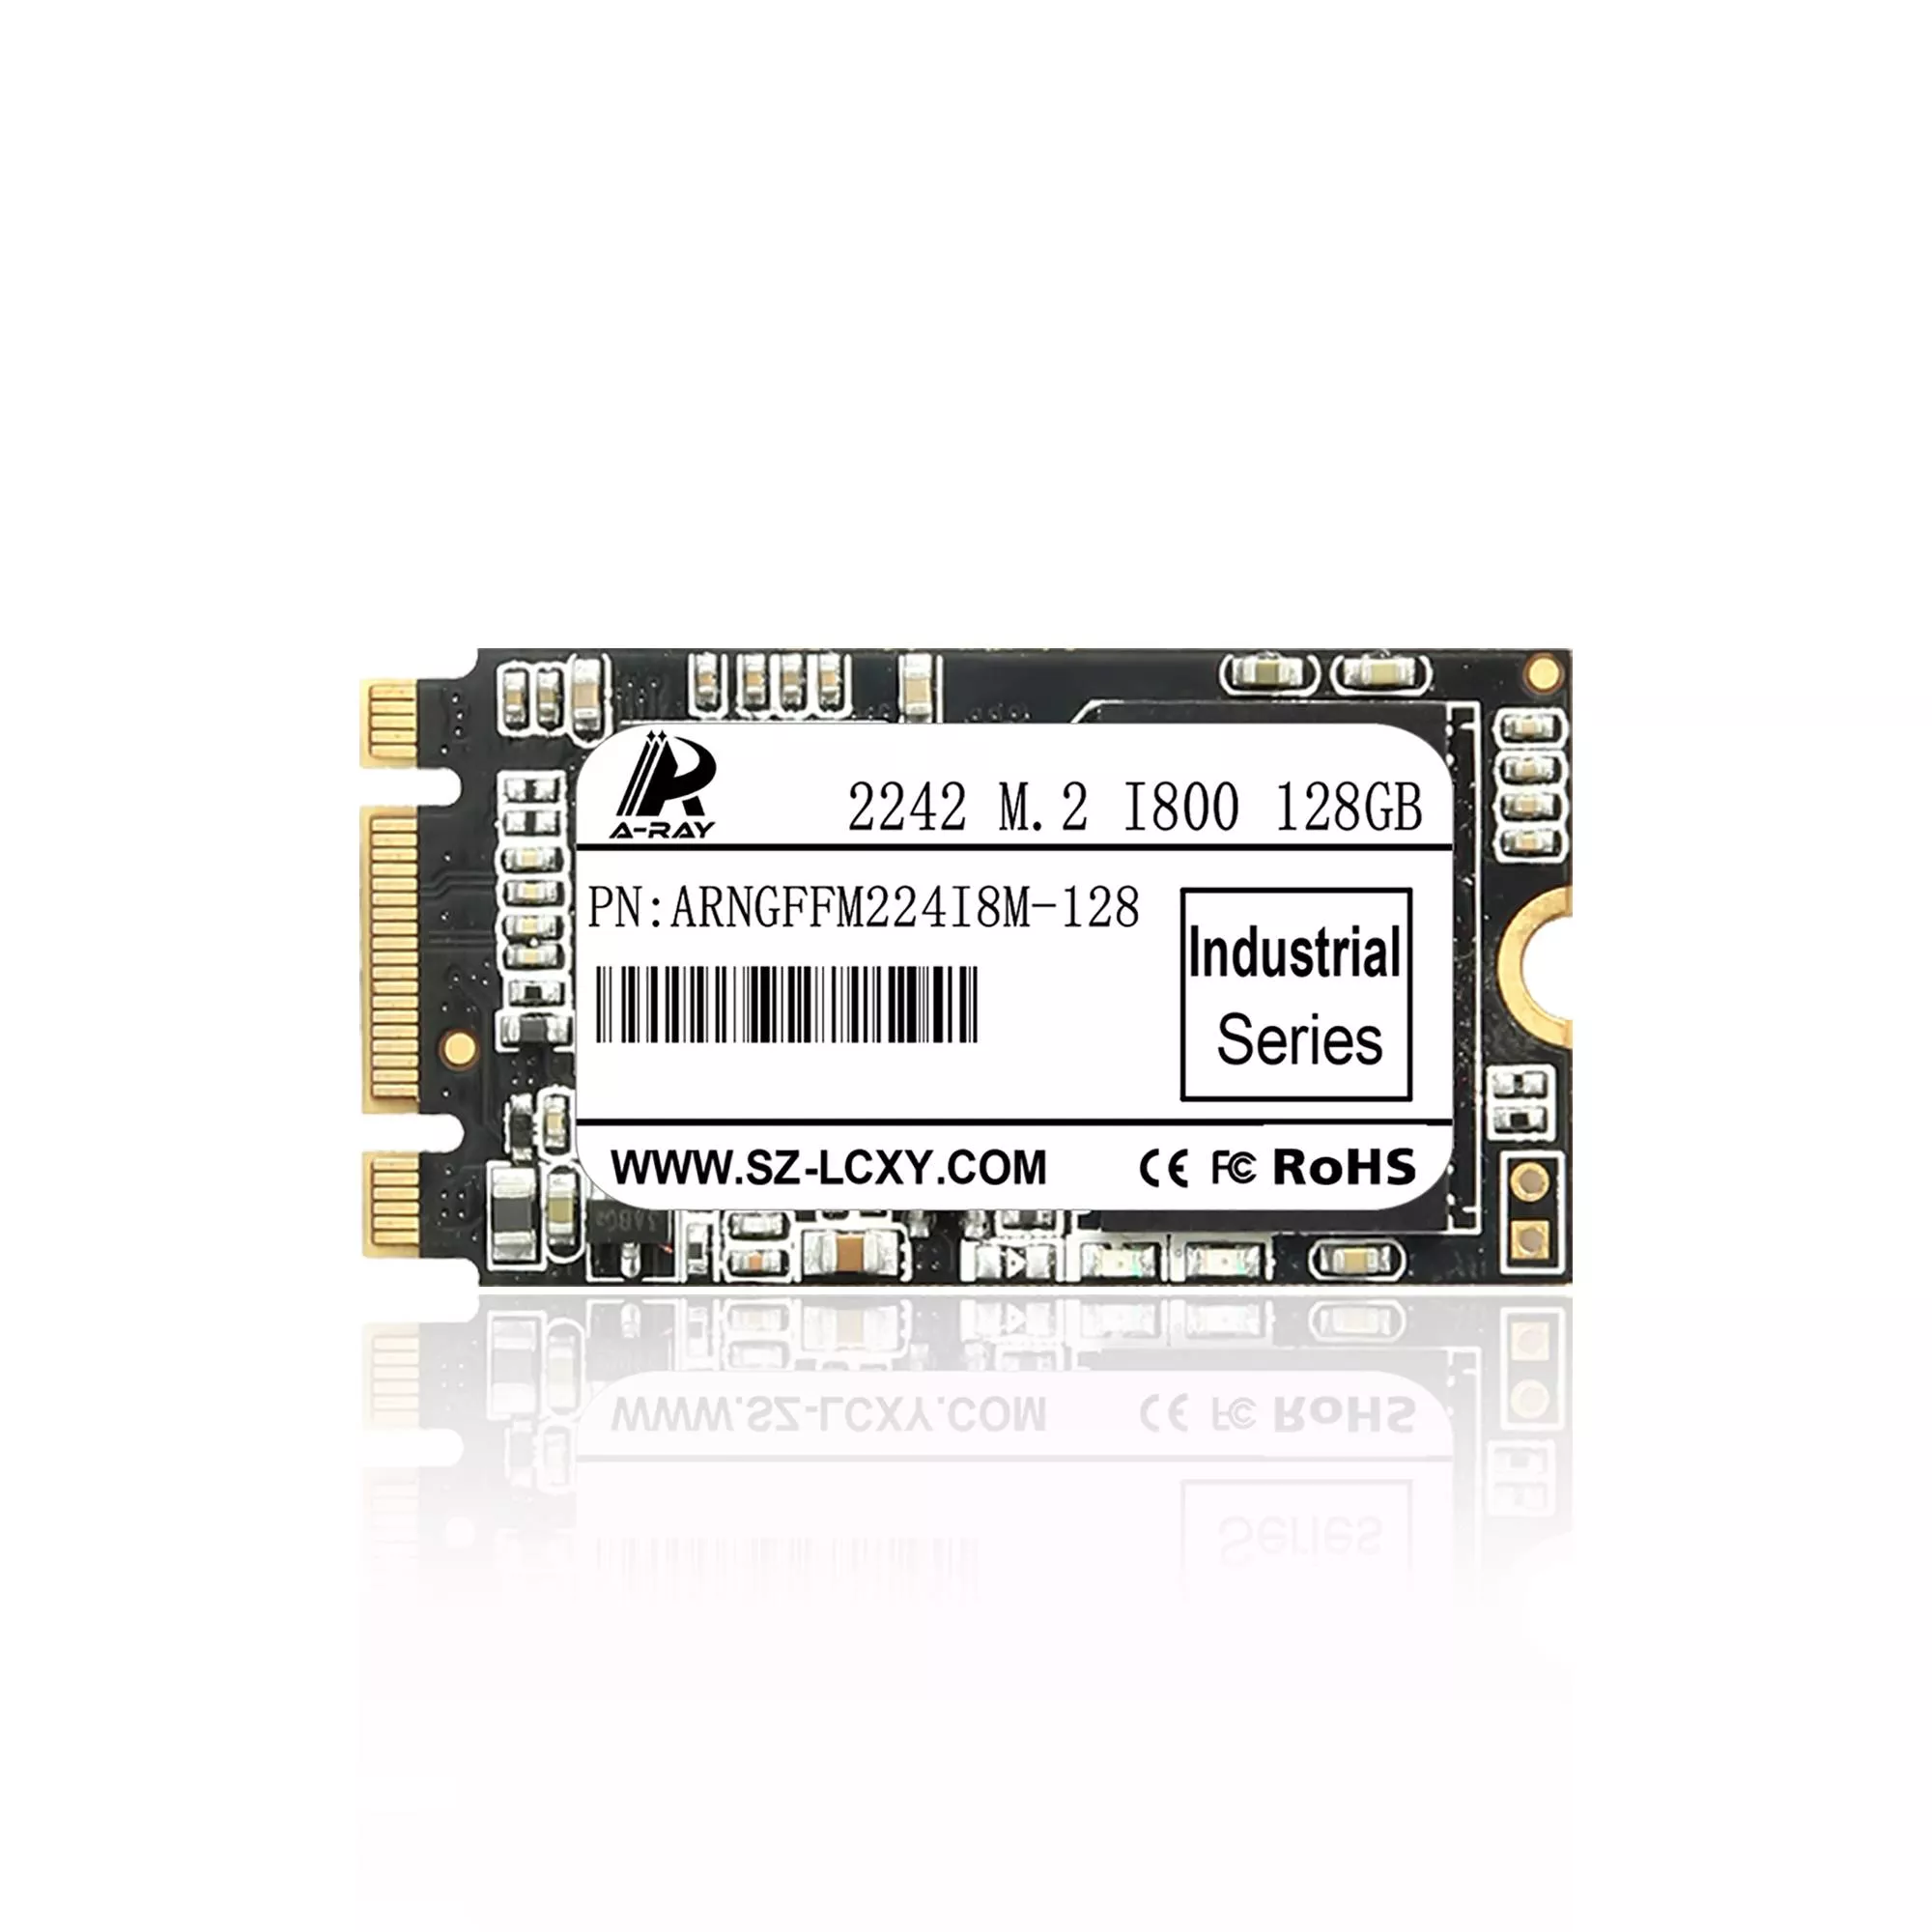 Ổ cứng SSD 128GB A-RAY 2242 NGFF M.2 6GBps I800 Industrial Series